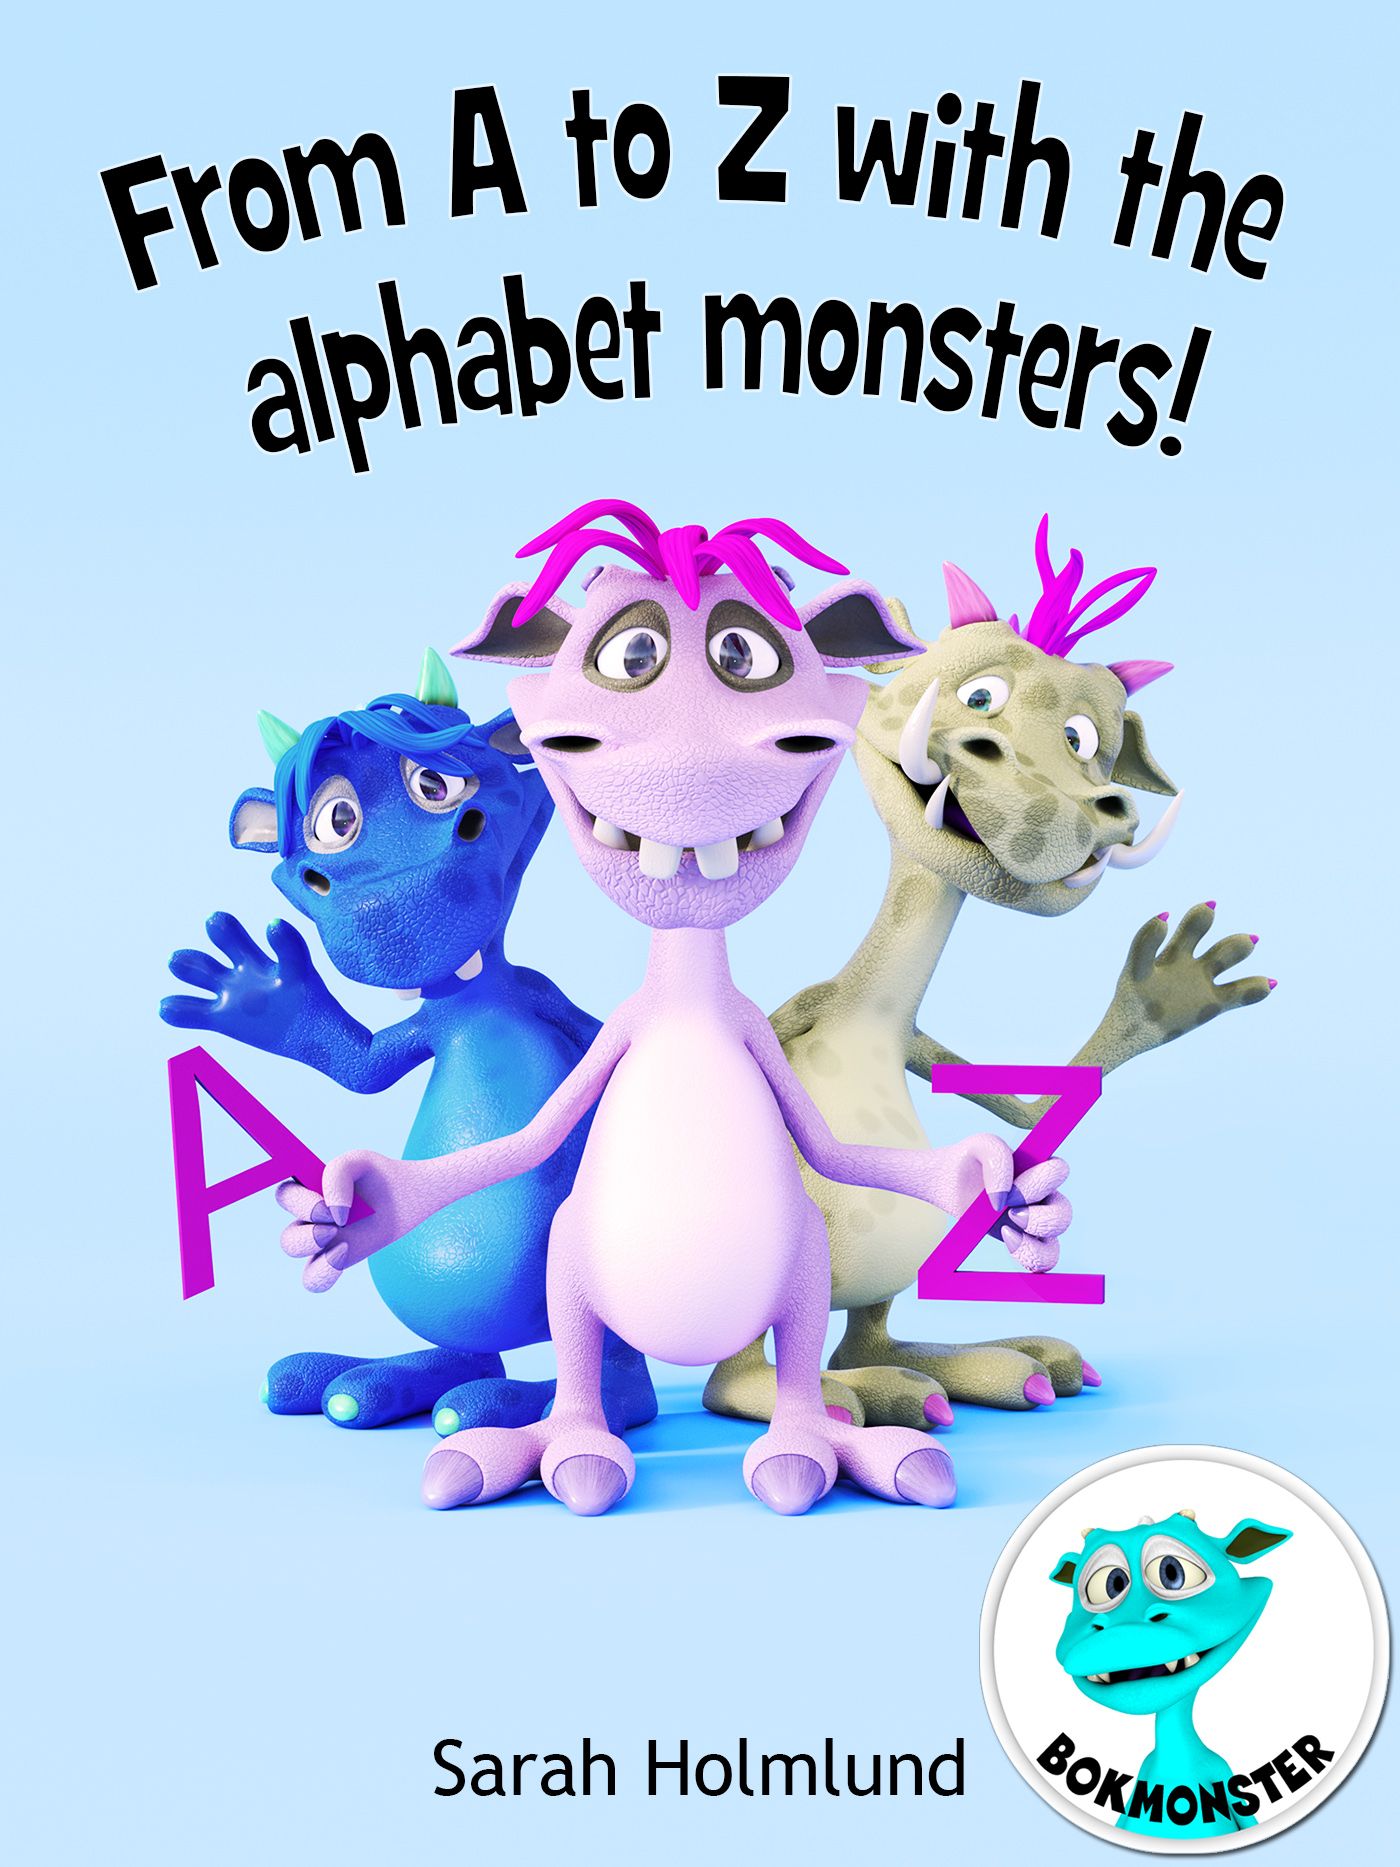 From A to Z with the alphabet monsters!, eBook by Sarah Holmlund